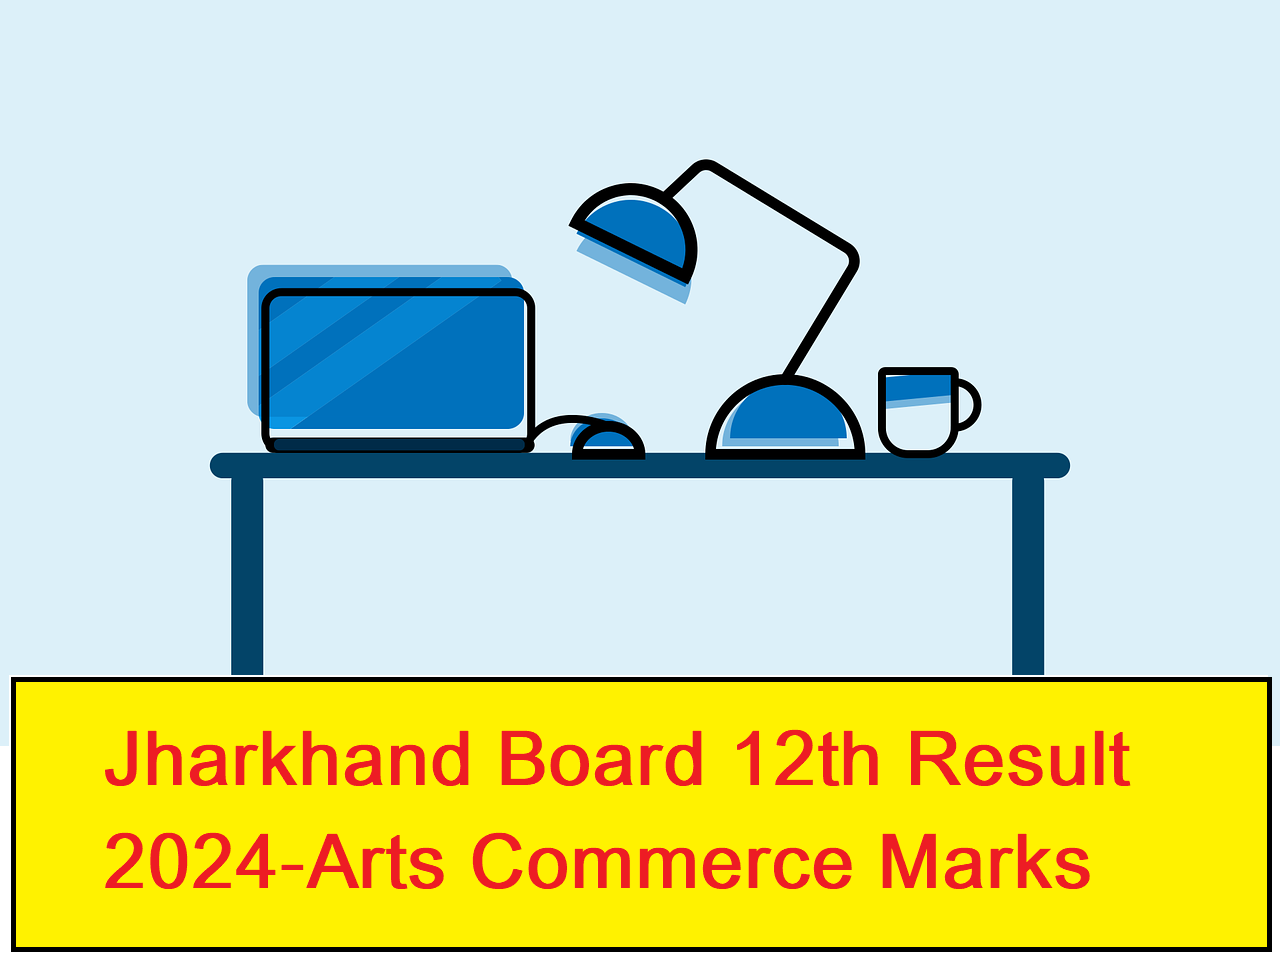 Jharkhand Board 12th Result